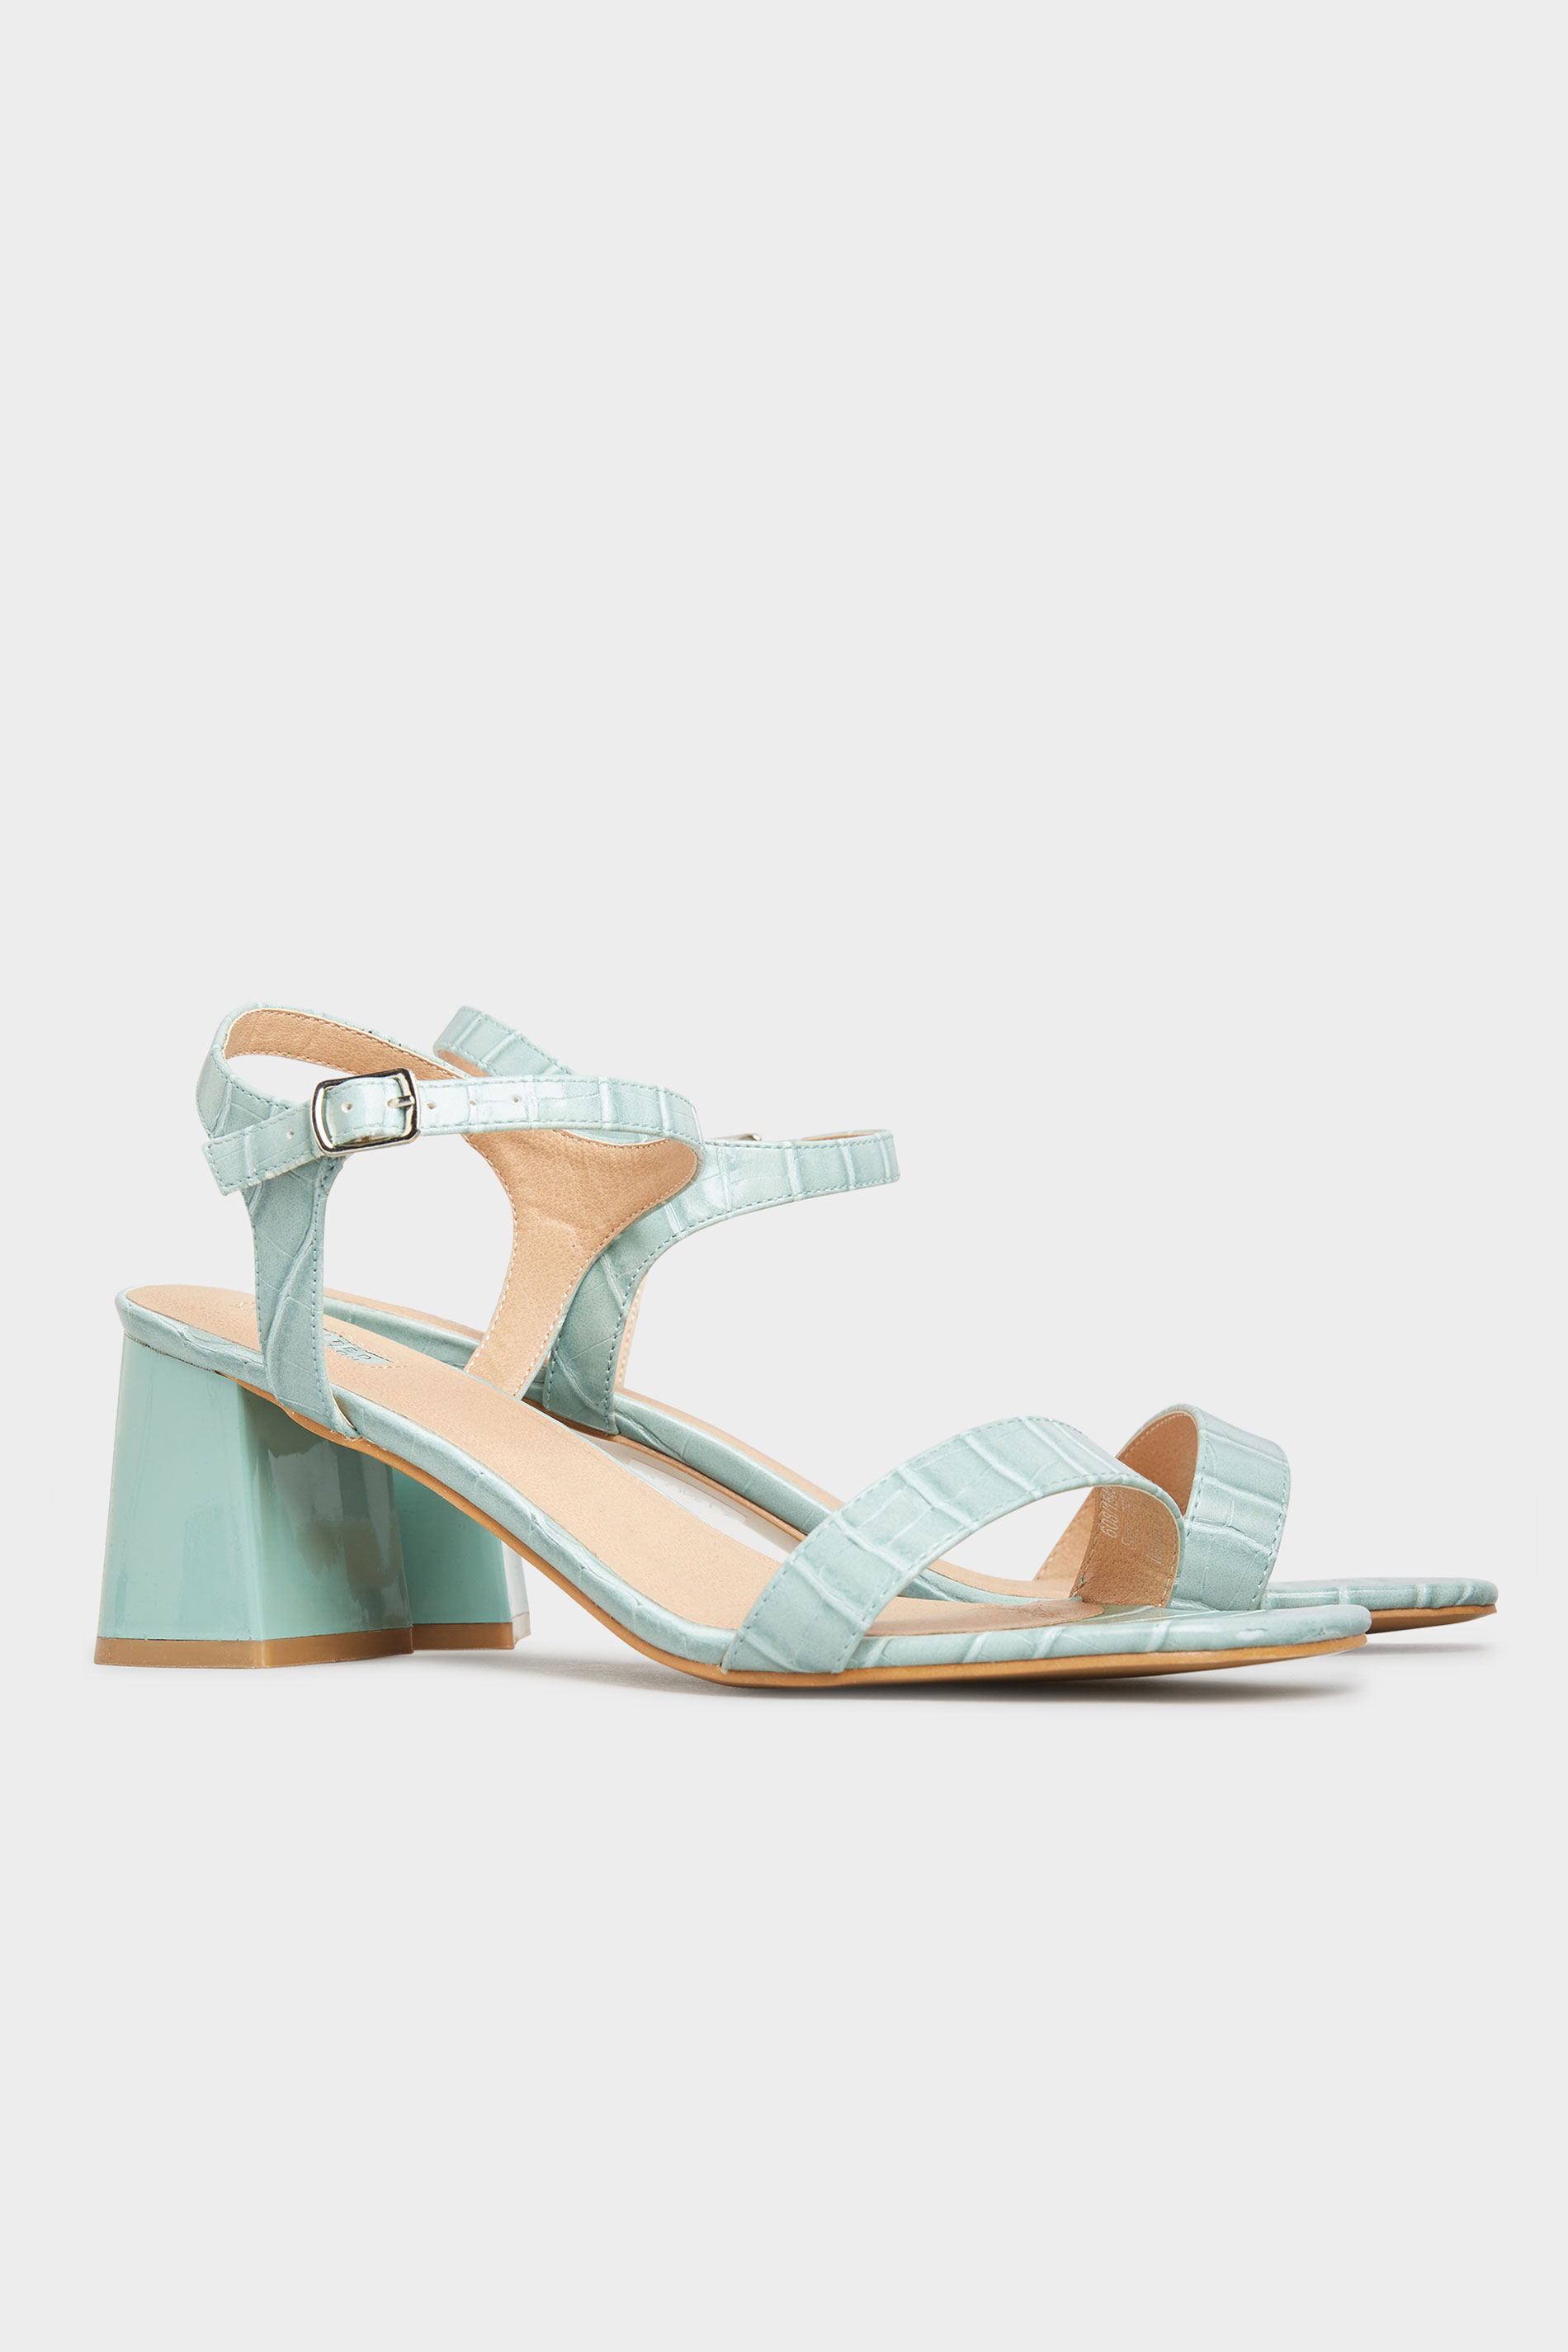 LIMITED COLLECTION Mint Green Block Heel Croc Sandal In Extra Wide Fit ...